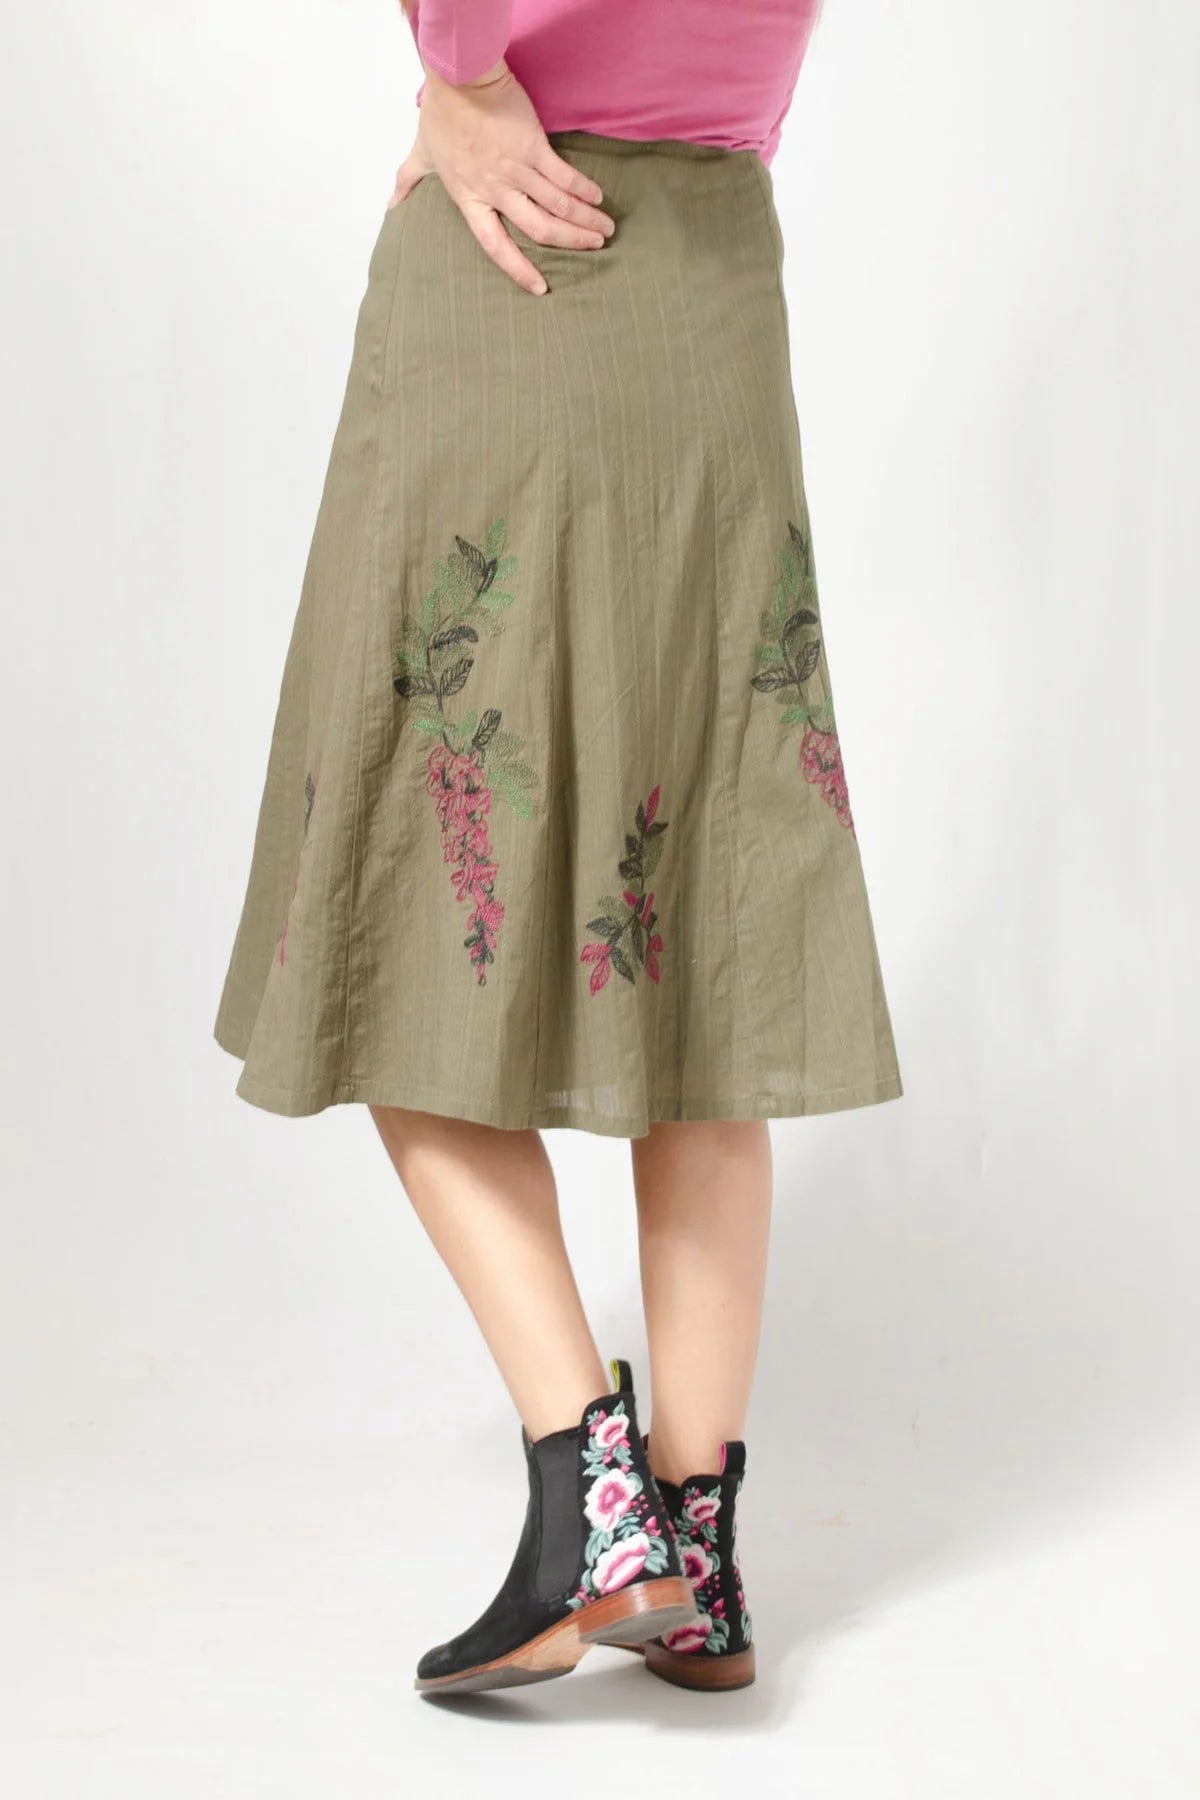 Laura Ashley Floral Midi Embroidered Skirt